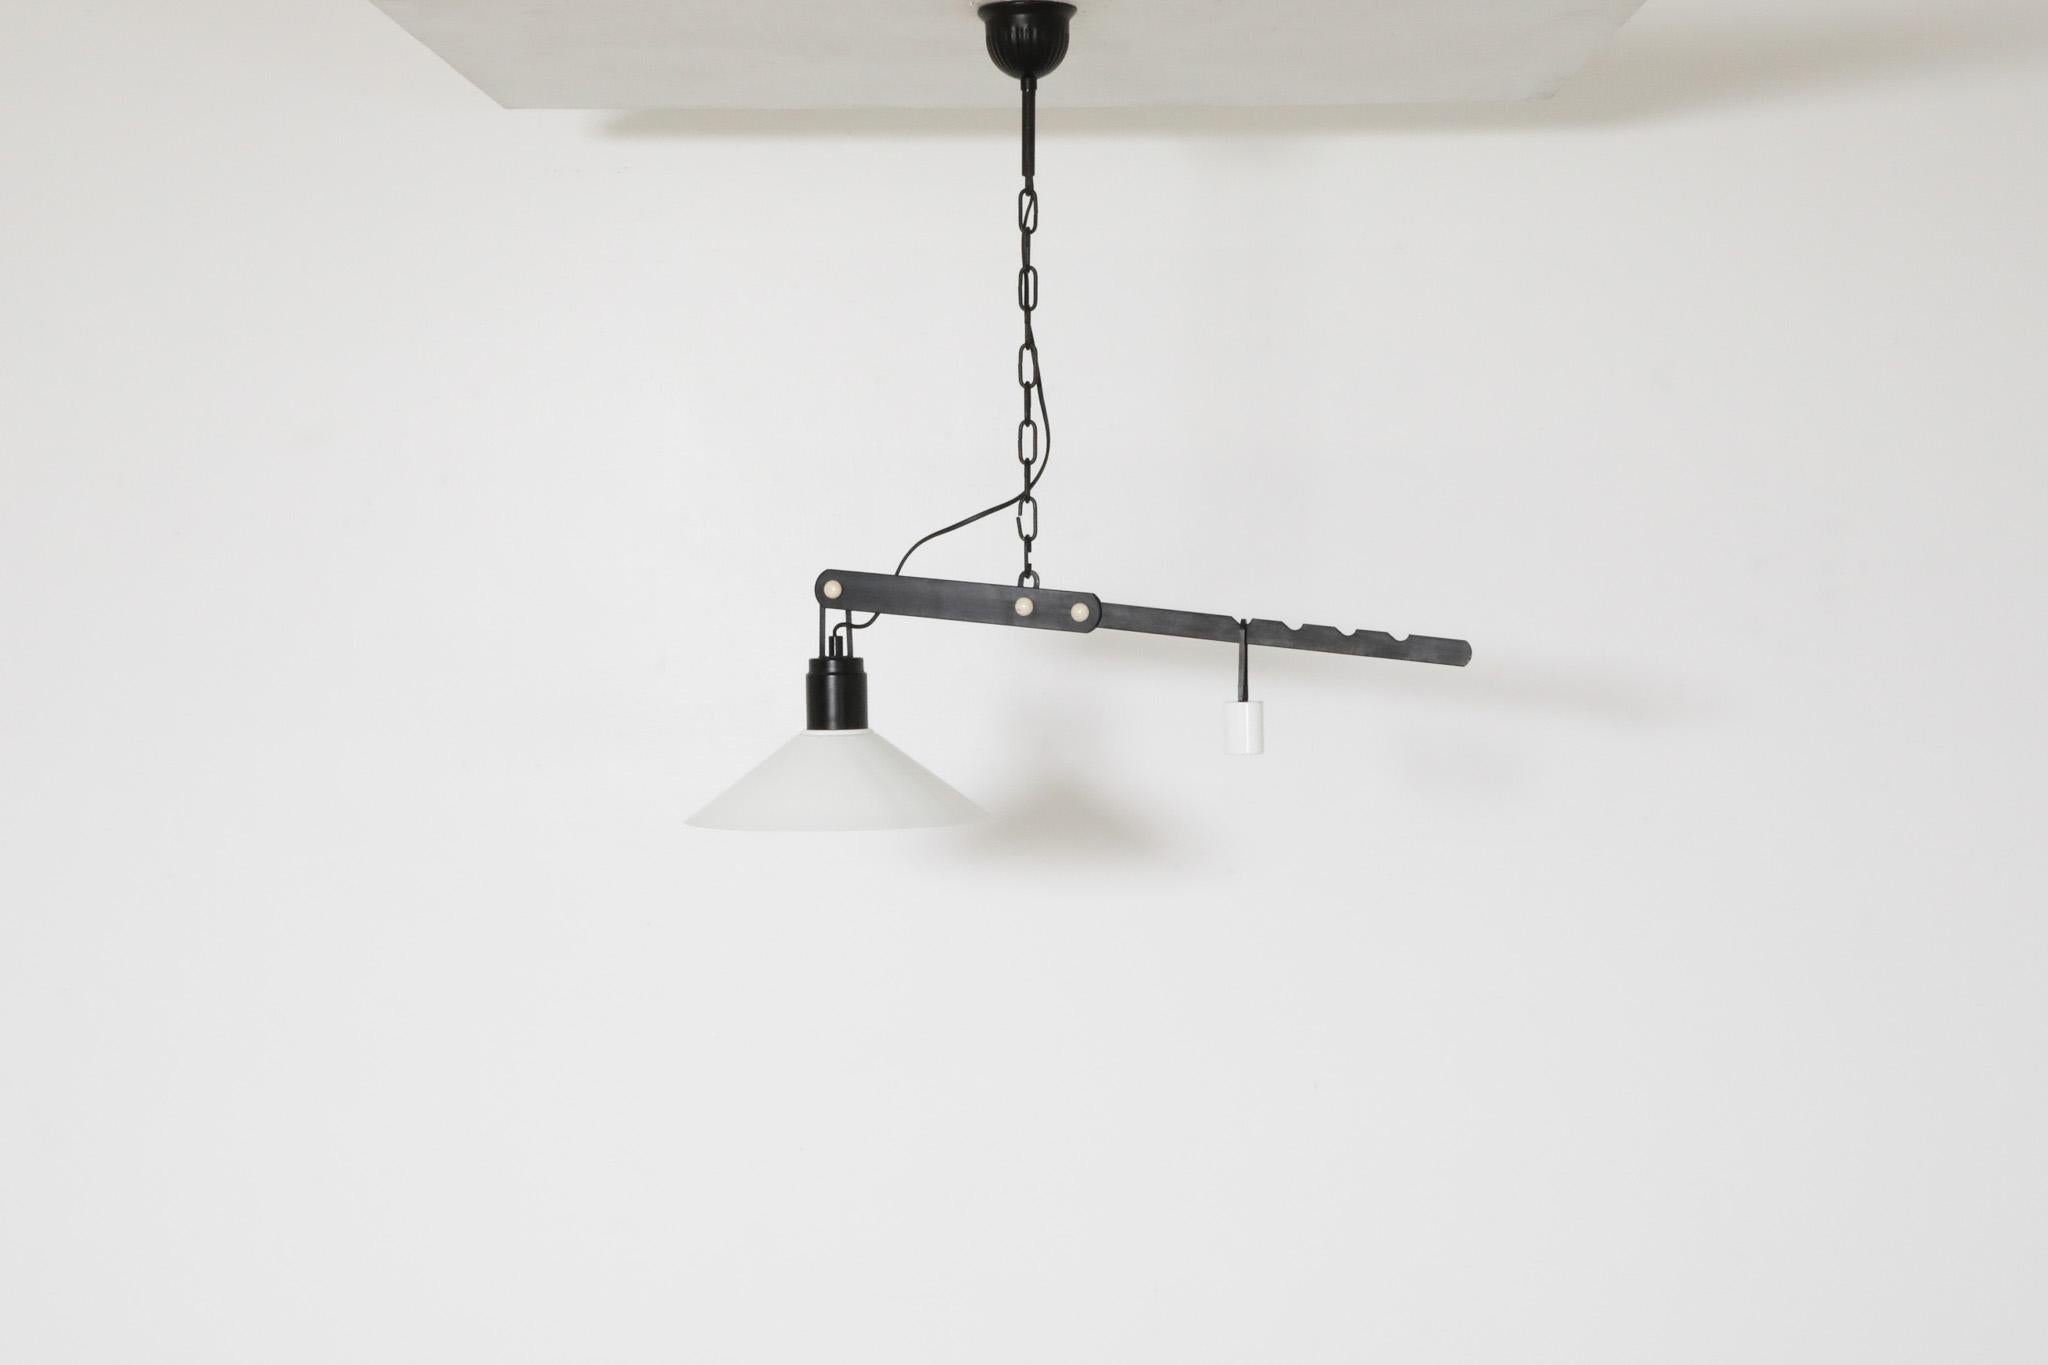 1970s Belgian counterbalance lamp with white enameled metal shade on black base metal and chain. An incredible mix of classic styling and unique artistry this pendant is adjusted by moving the counter weight up or down the notches on its base. this